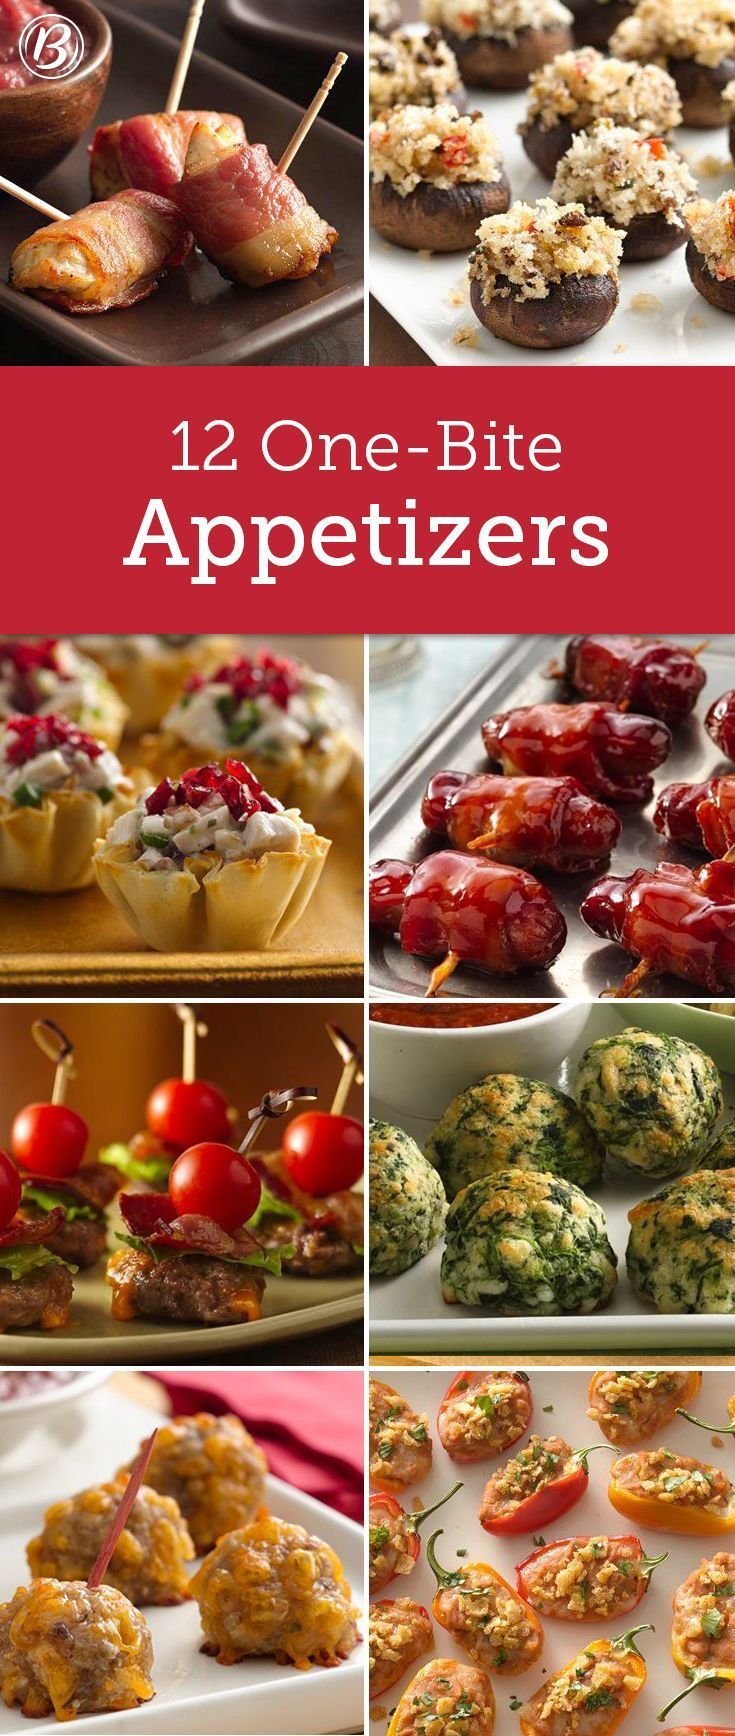 Think mini! These small appetizer bites are perfect for mixing and mingling at par